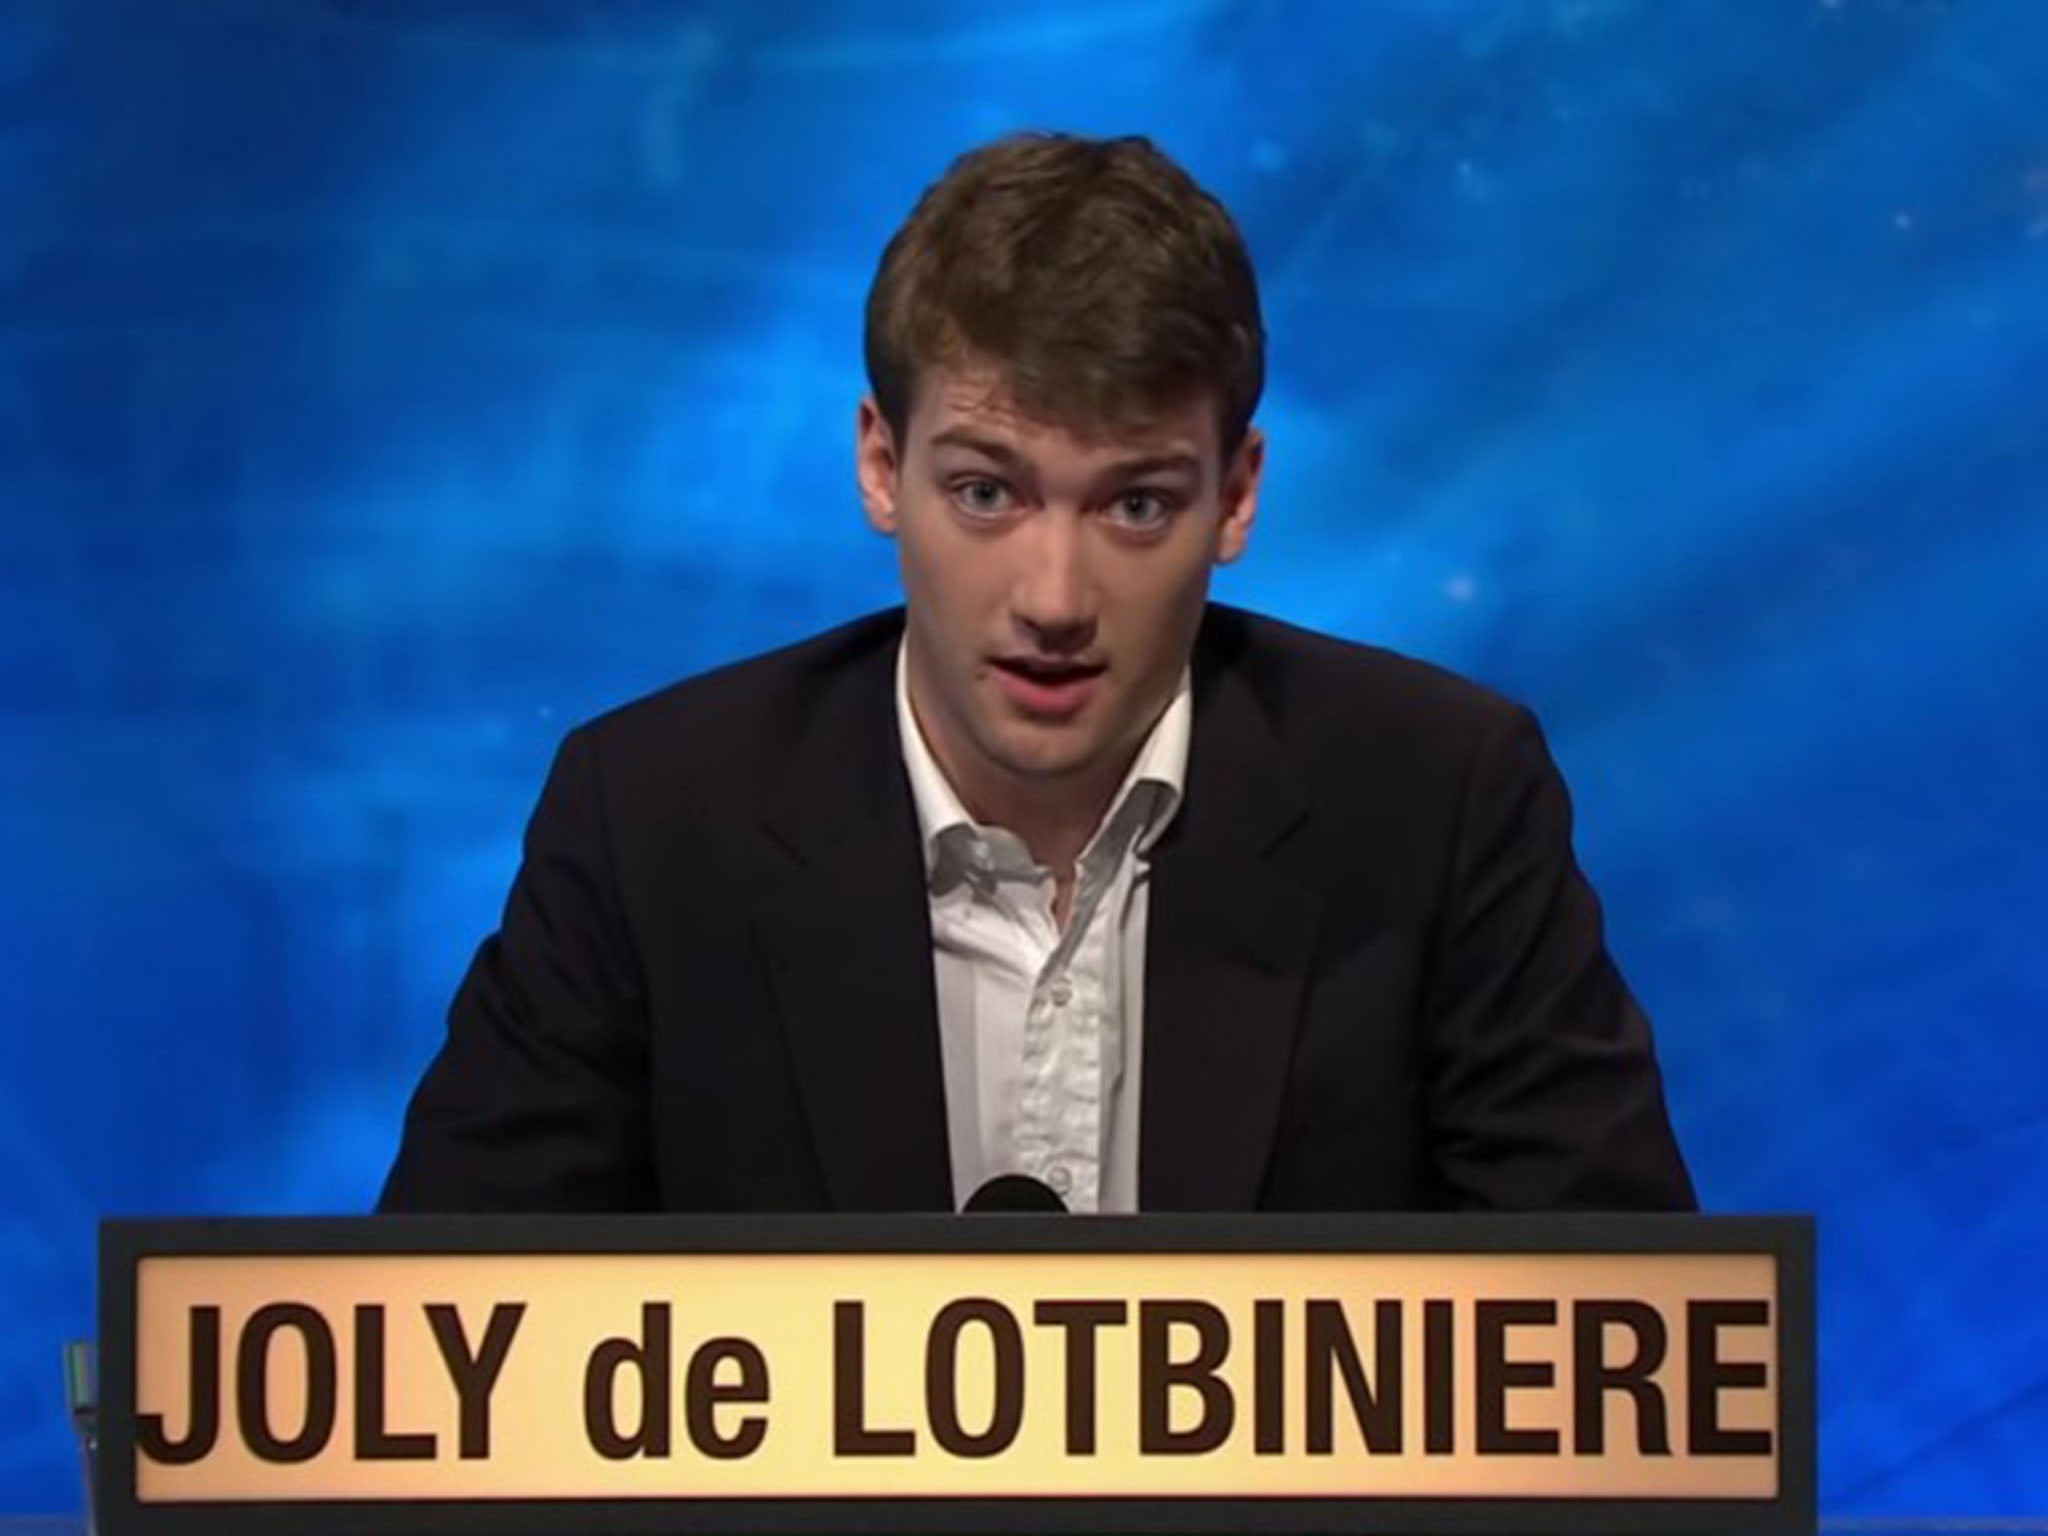 Joly de Lotbiniere (far left) became a star following his appearance on University Challenge